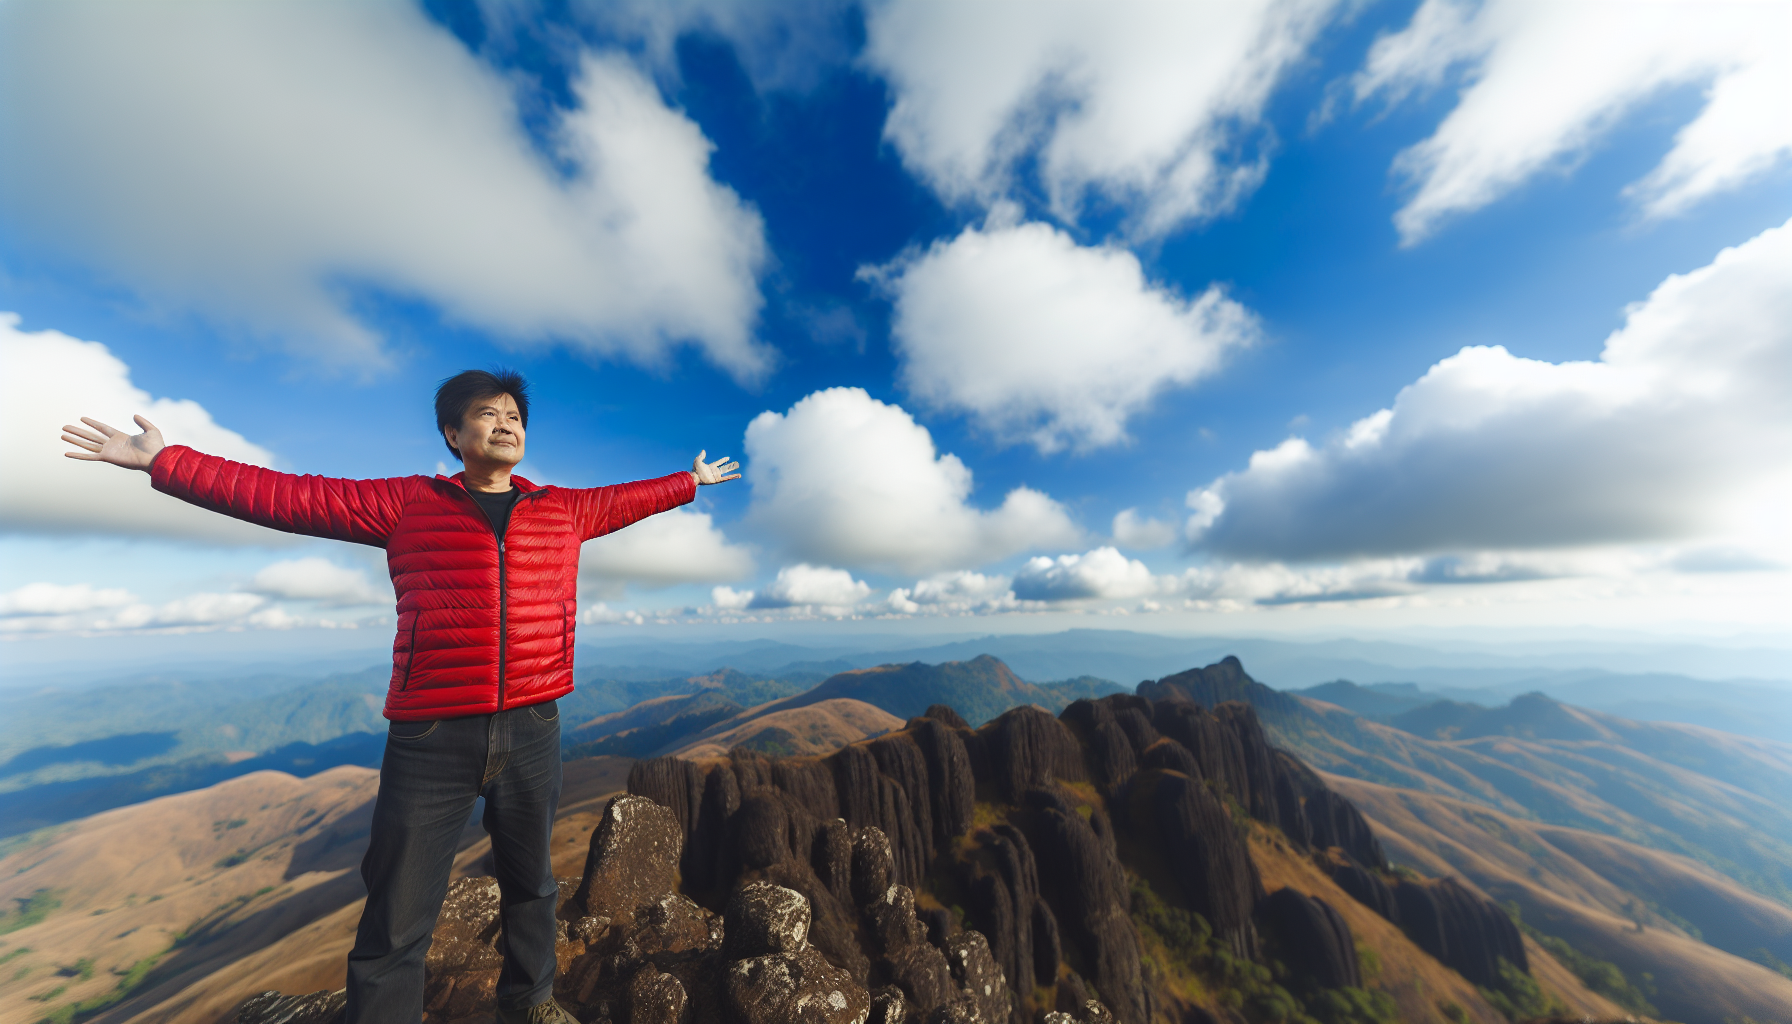 A person standing on a mountain peak with arms outstretched, symbolizing endless potential and embracing abundance mindset